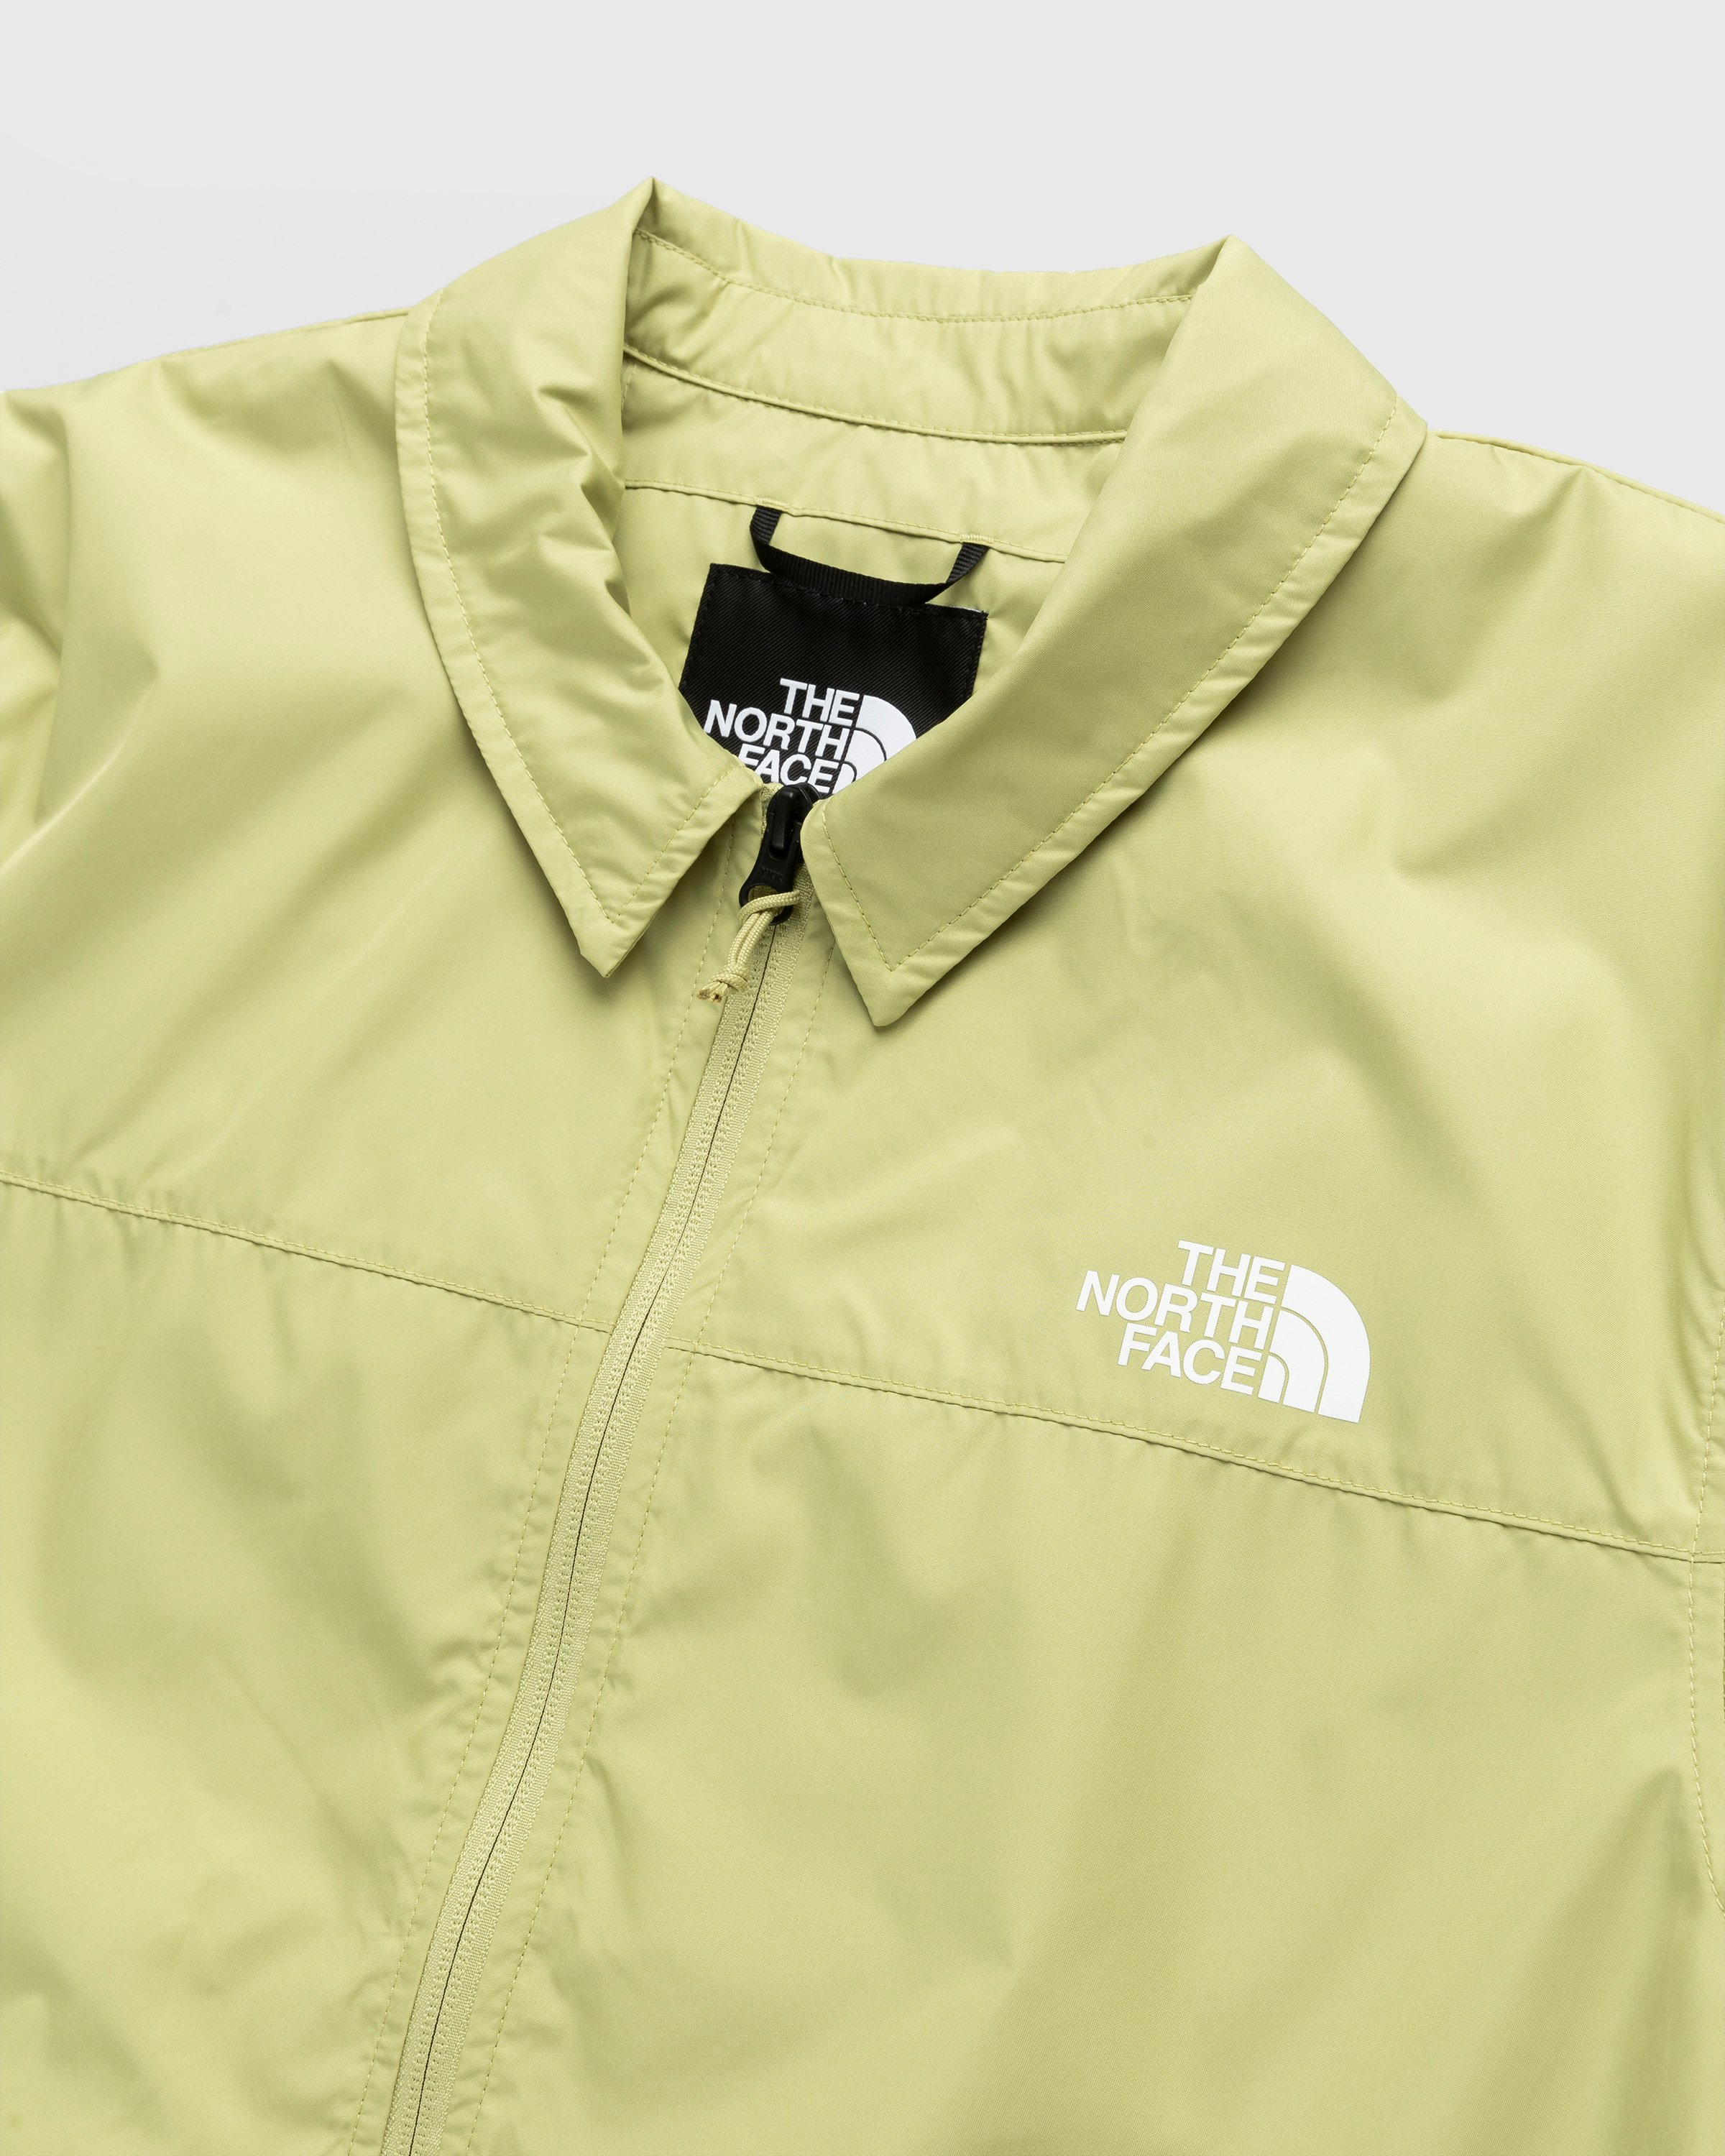 The North Face - Cyclone Coaches Jacket Weeping Willow - Clothing - Green - Image 6